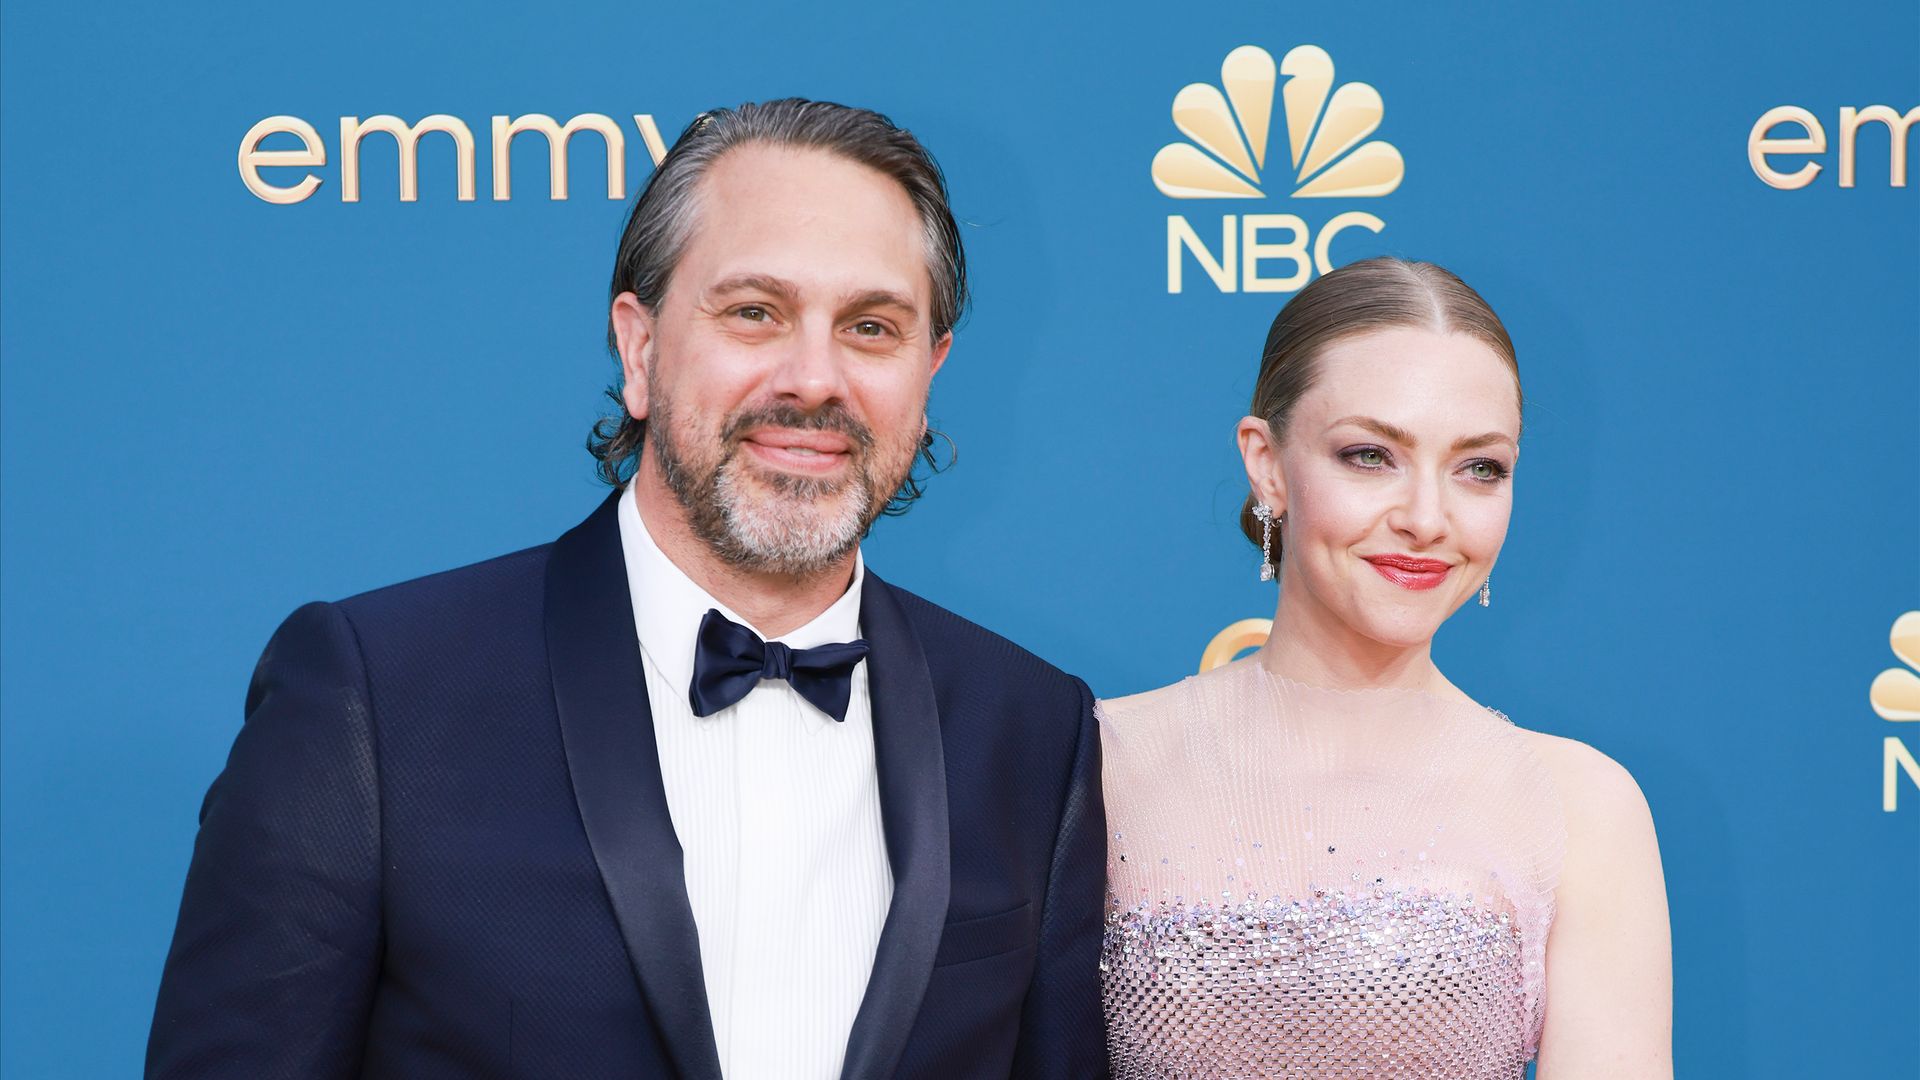 Thomas Sadoski and Amanda Seyfried arriving at the 74th Primetime Emmy Awards at the Microsoft Theater on Monday, September 12, 2022